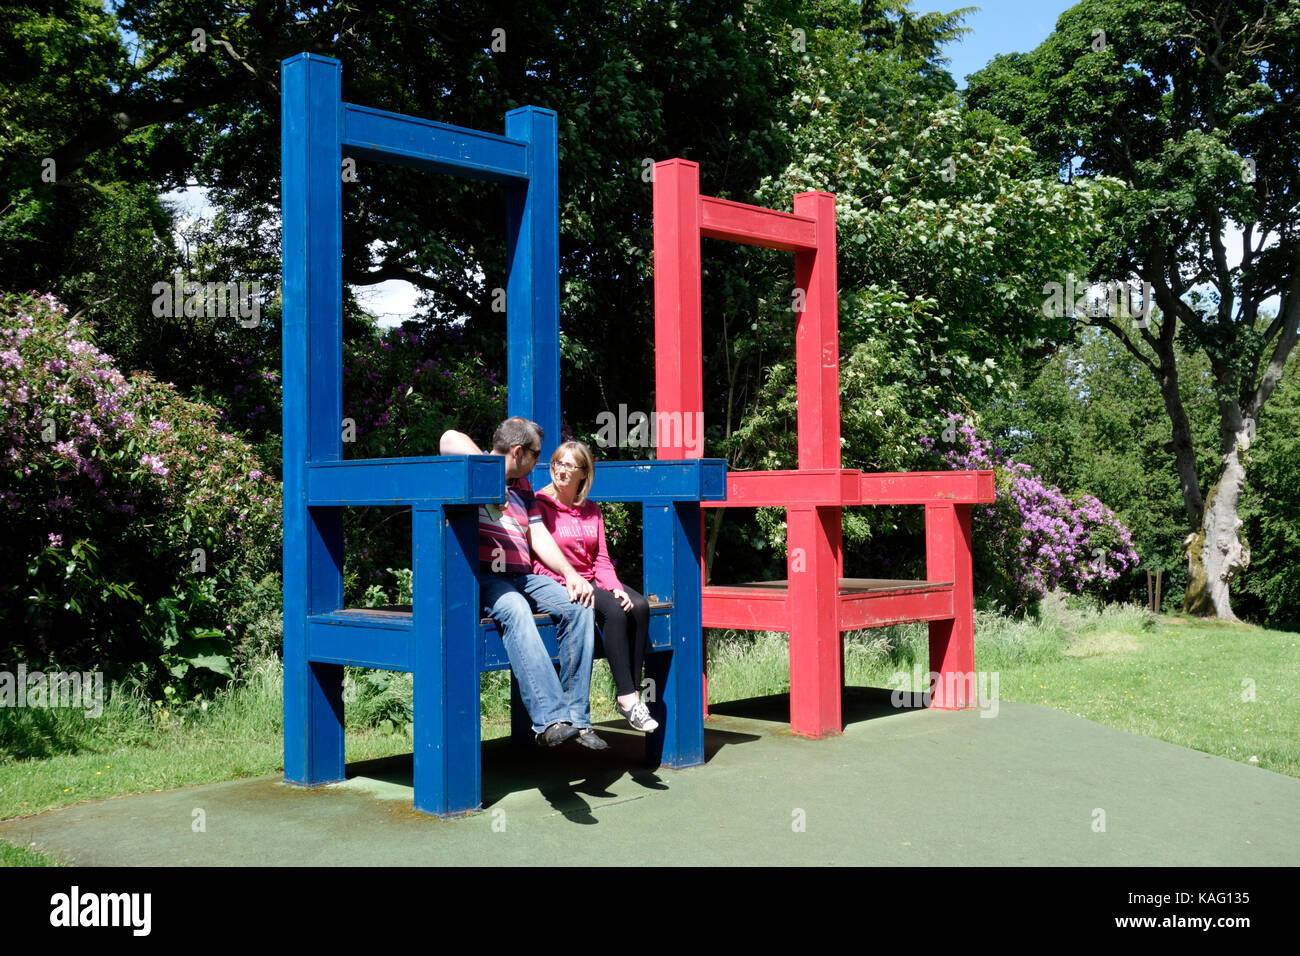 https://c8.alamy.com/comp/KAG135/couple-sat-on-two-giant-chairs-at-vogrie-country-park-KAG135.jpg